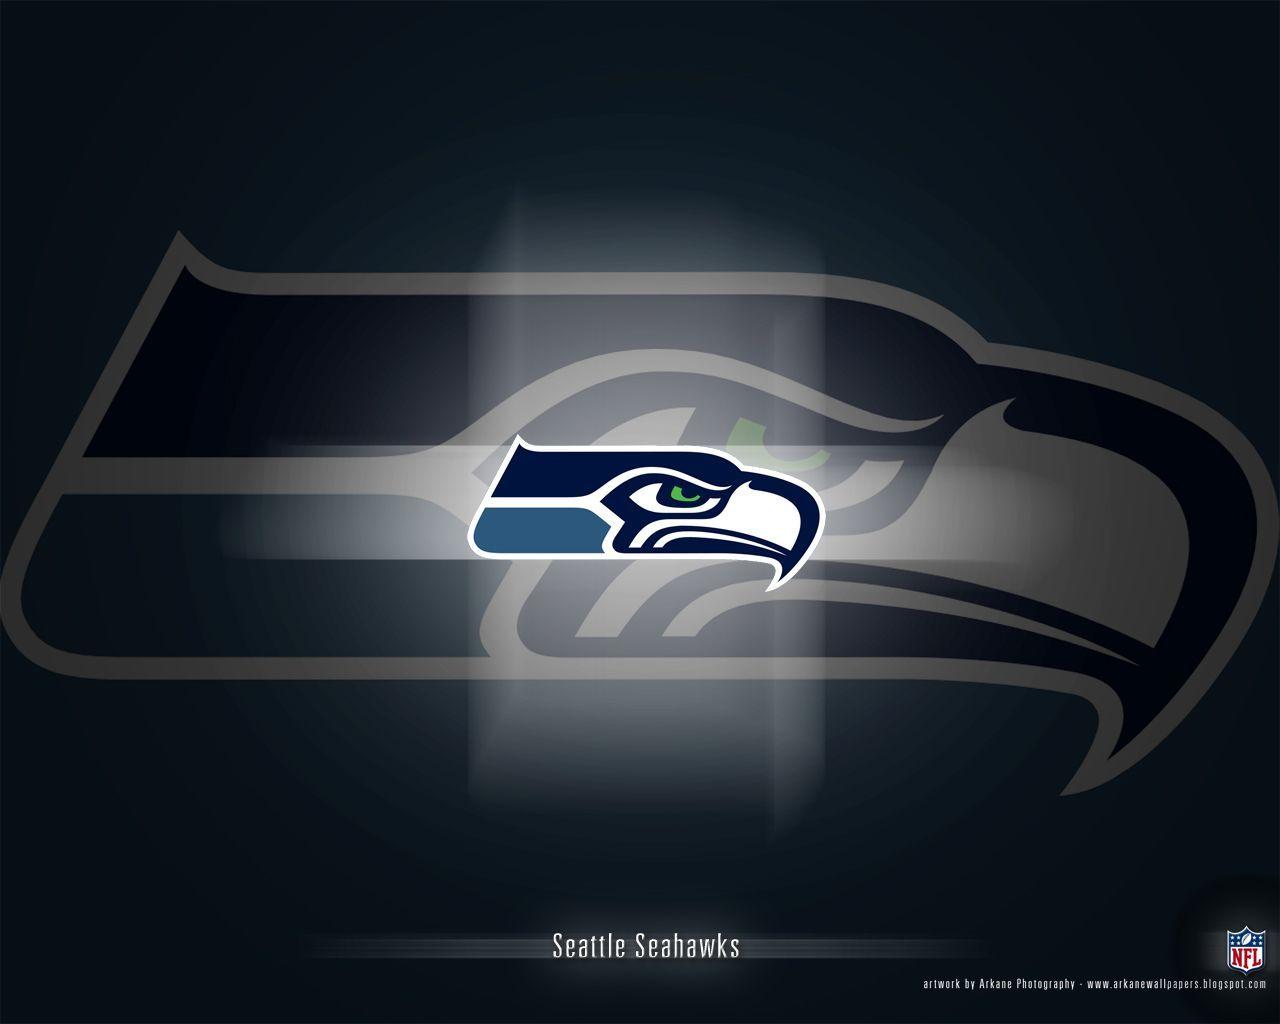 Seattle Seahawks Wallpapers Pictures 26511 Image